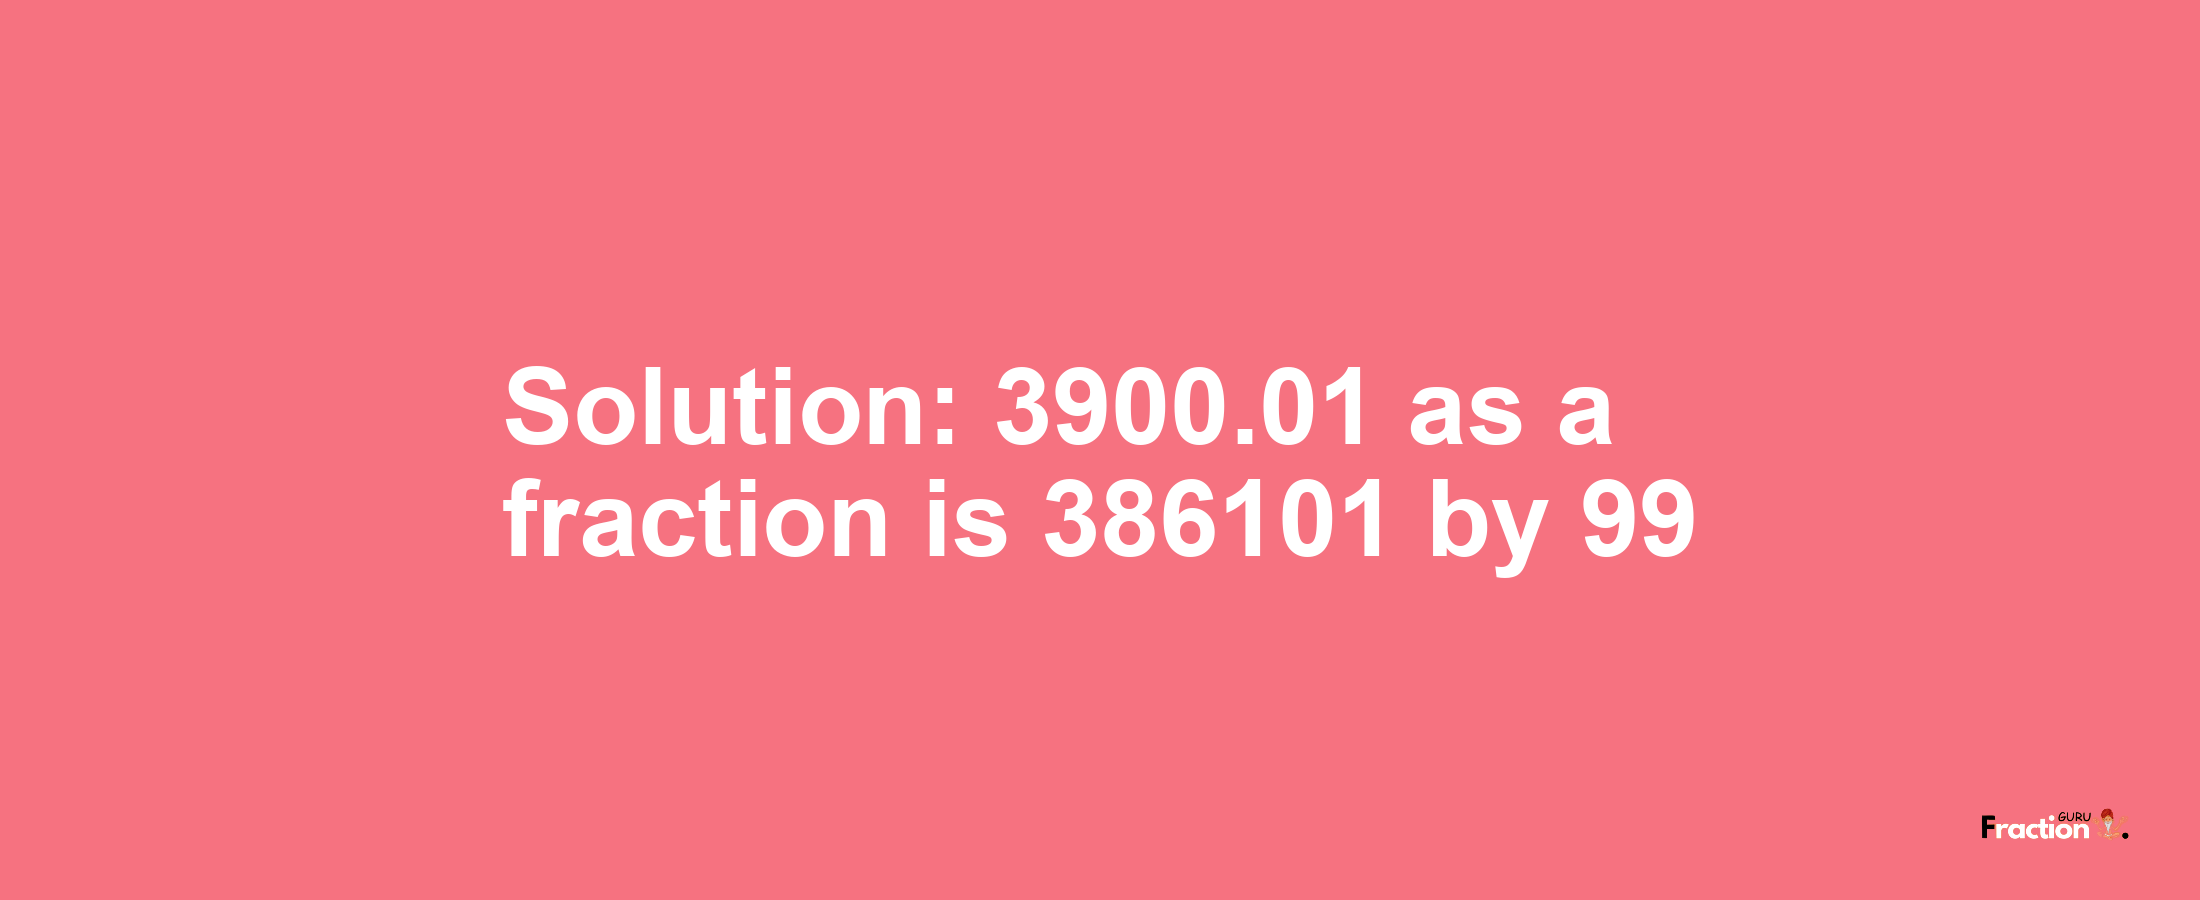 Solution:3900.01 as a fraction is 386101/99